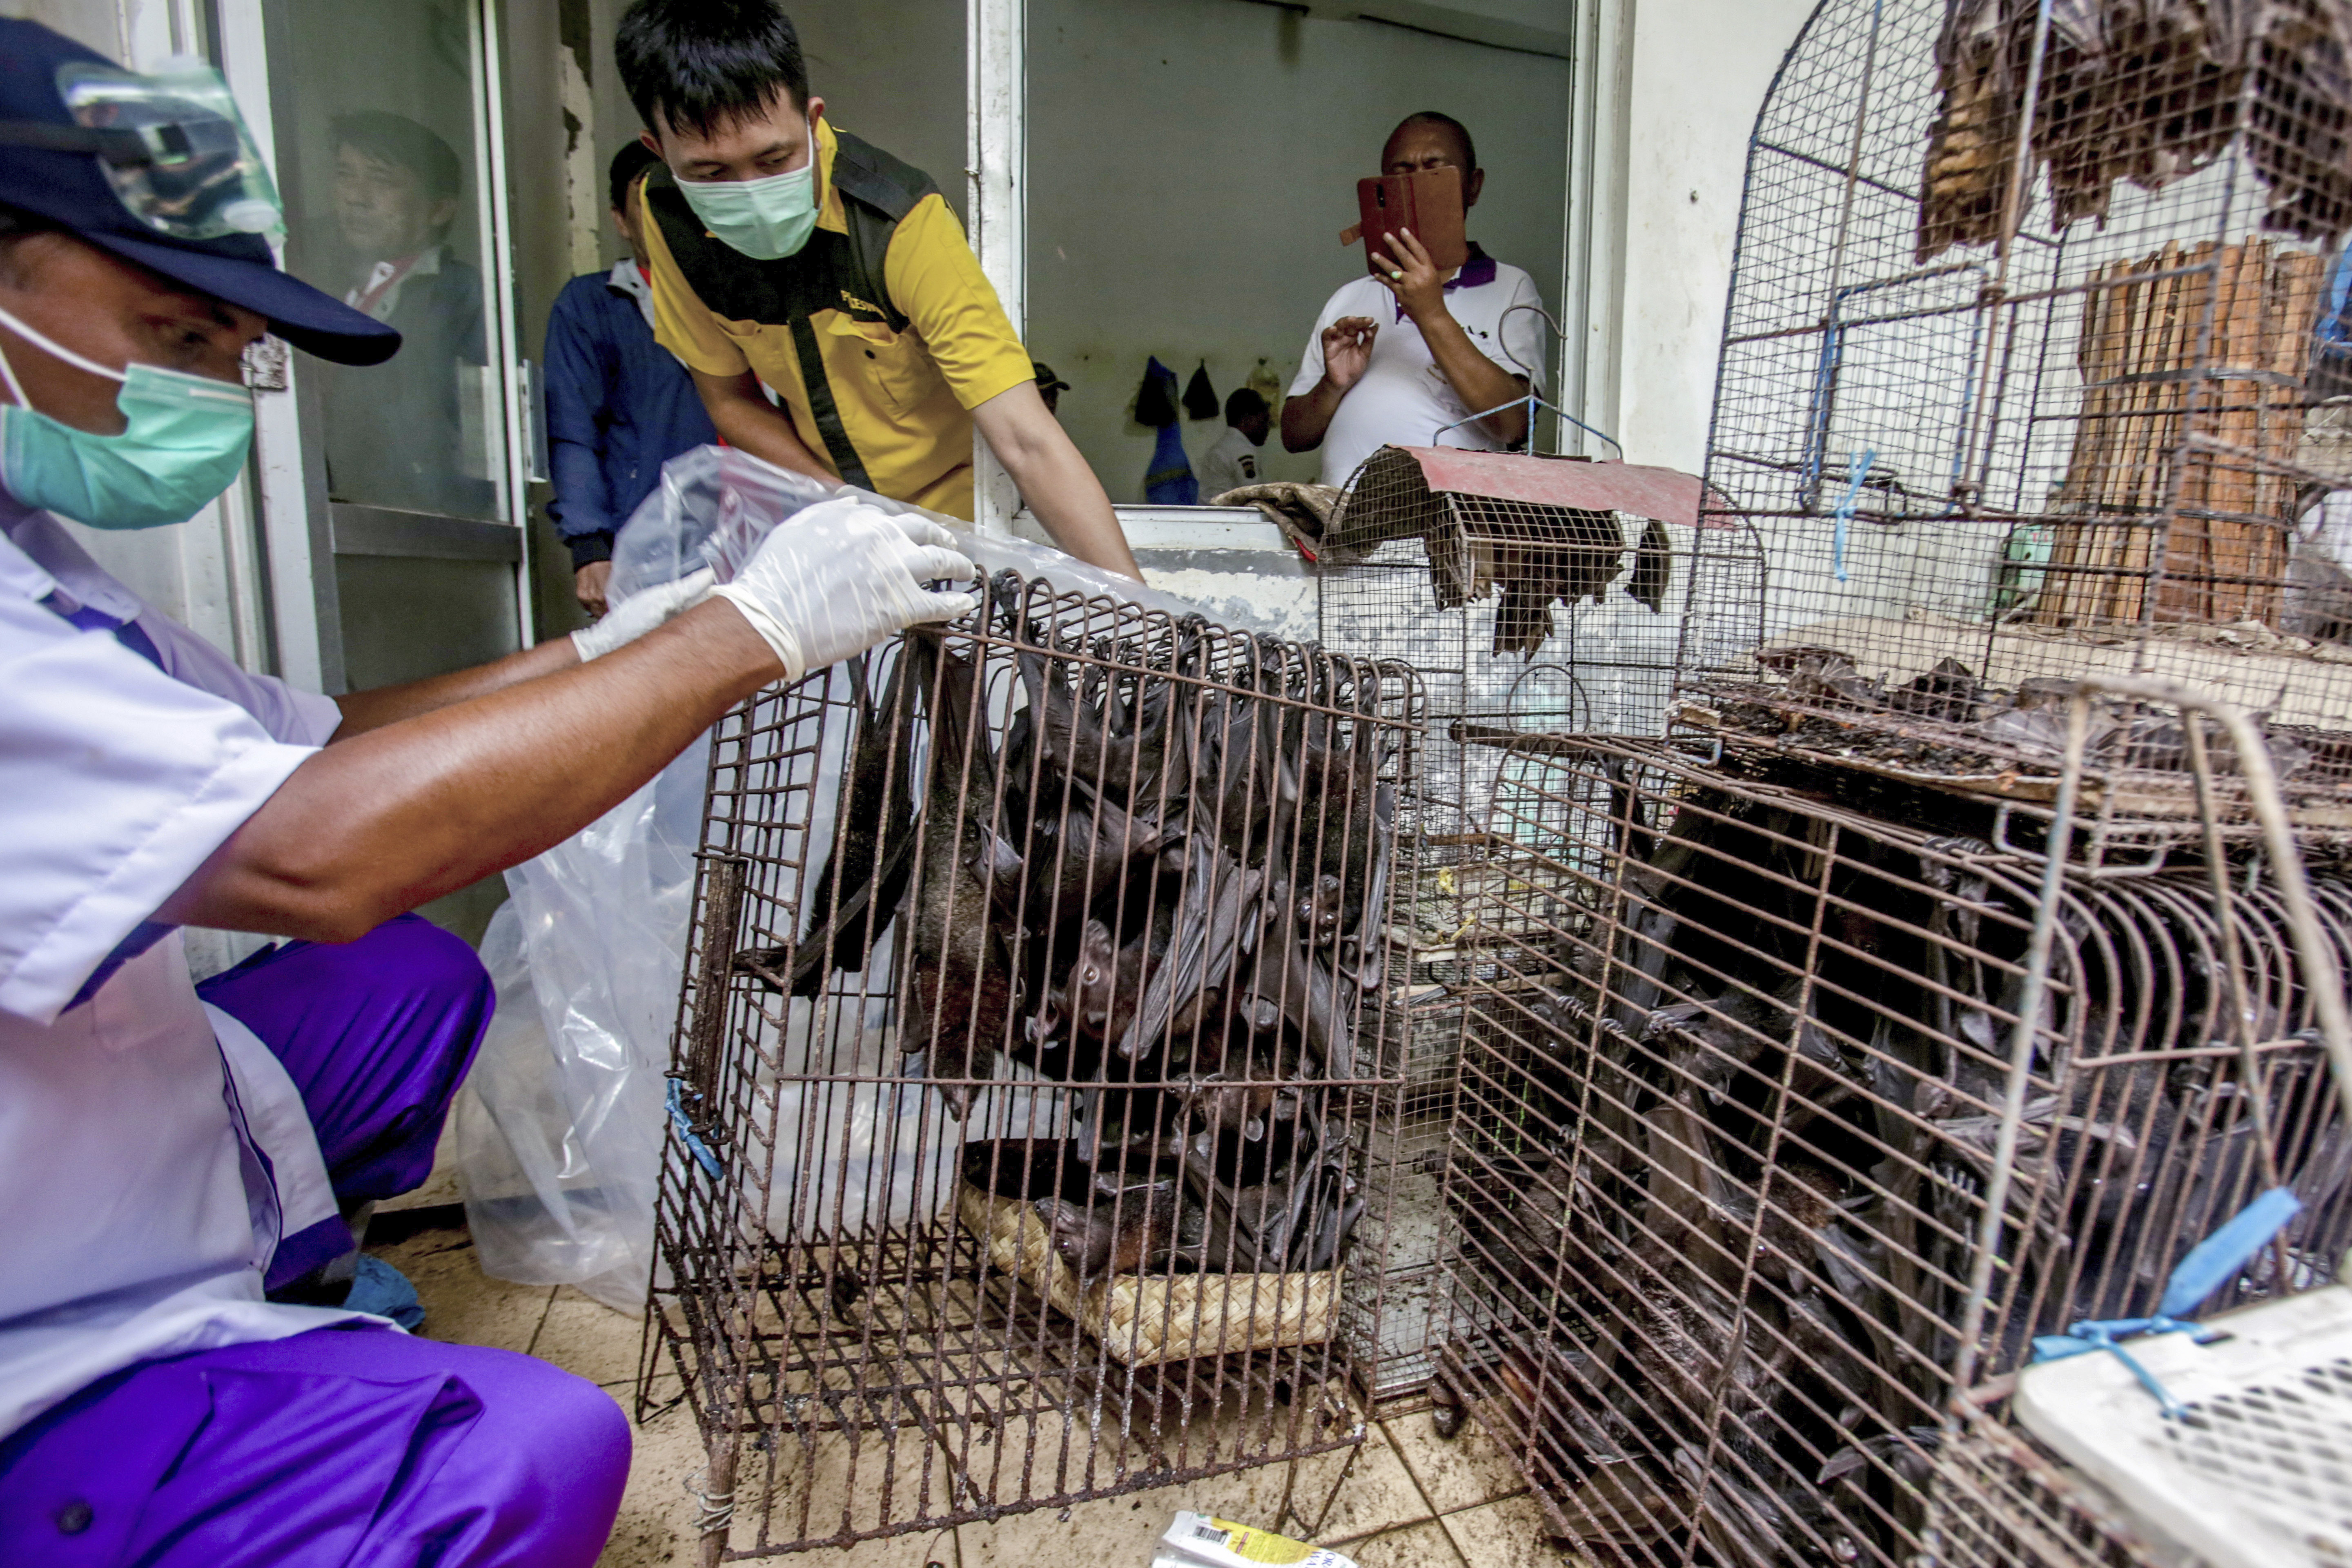 Health officials inspect bats to be confiscated and culled in the wake of coronavirus outbreak at a live animal market in Solo, Central Java, Indonesia. The World Health Organization said Friday May 8, 2020, that although a market in the Chinese city of Wuhan selling live animals likely played a significant role in the emergence of the new coronavirus, it does not recommend that such live markets be shut down globally. Photo: AP